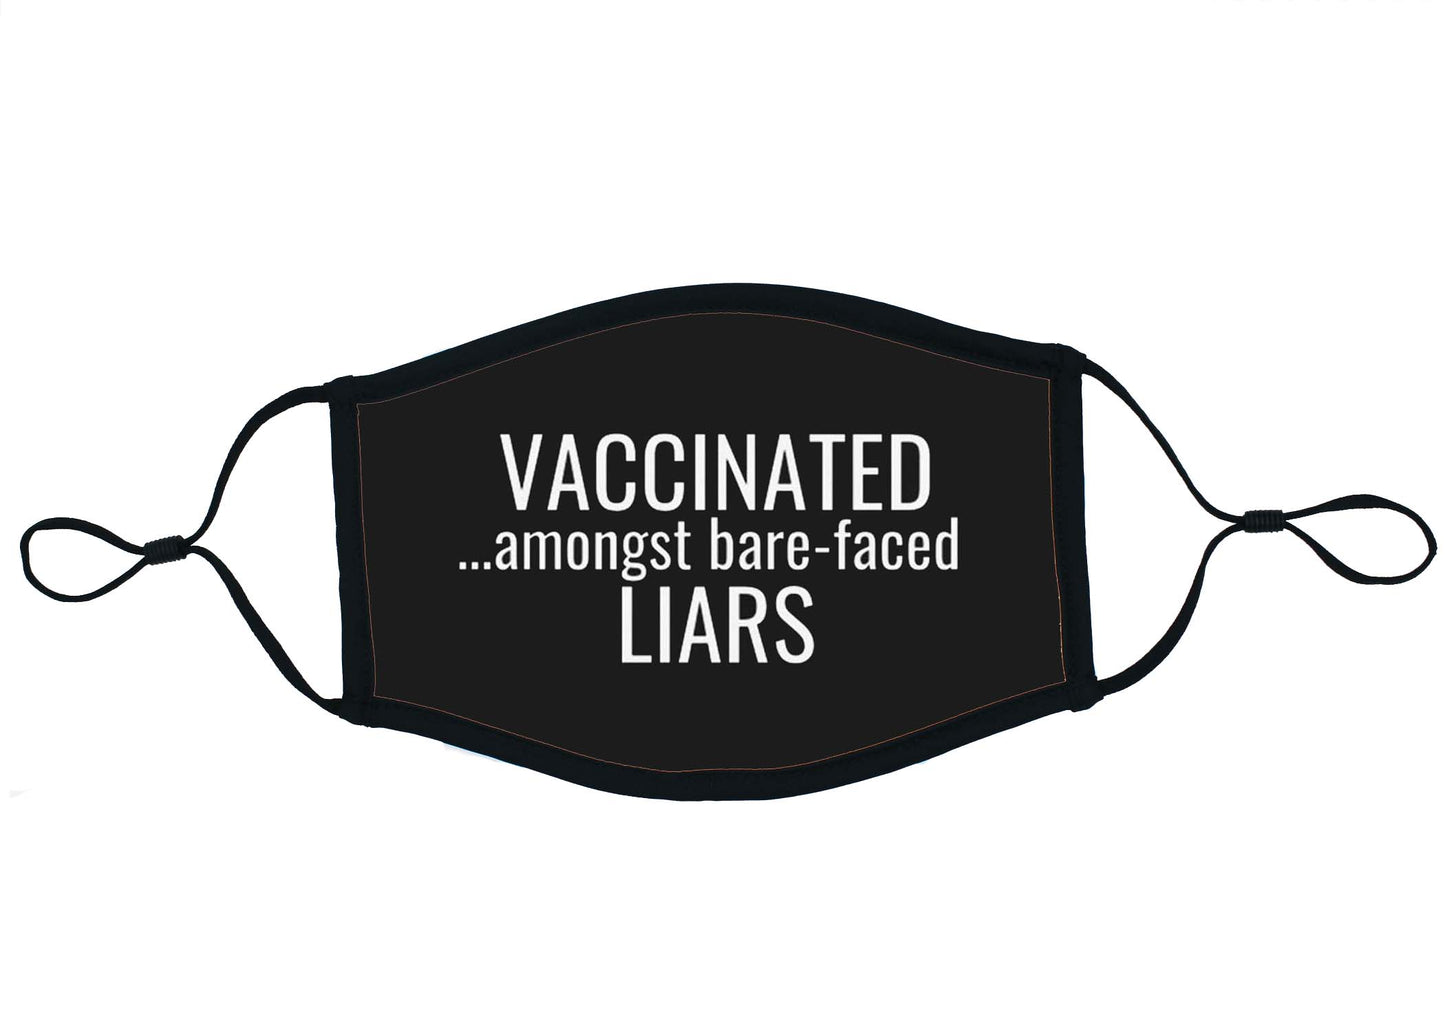 "VACCINATED" Amongst Bare-Faced Liars